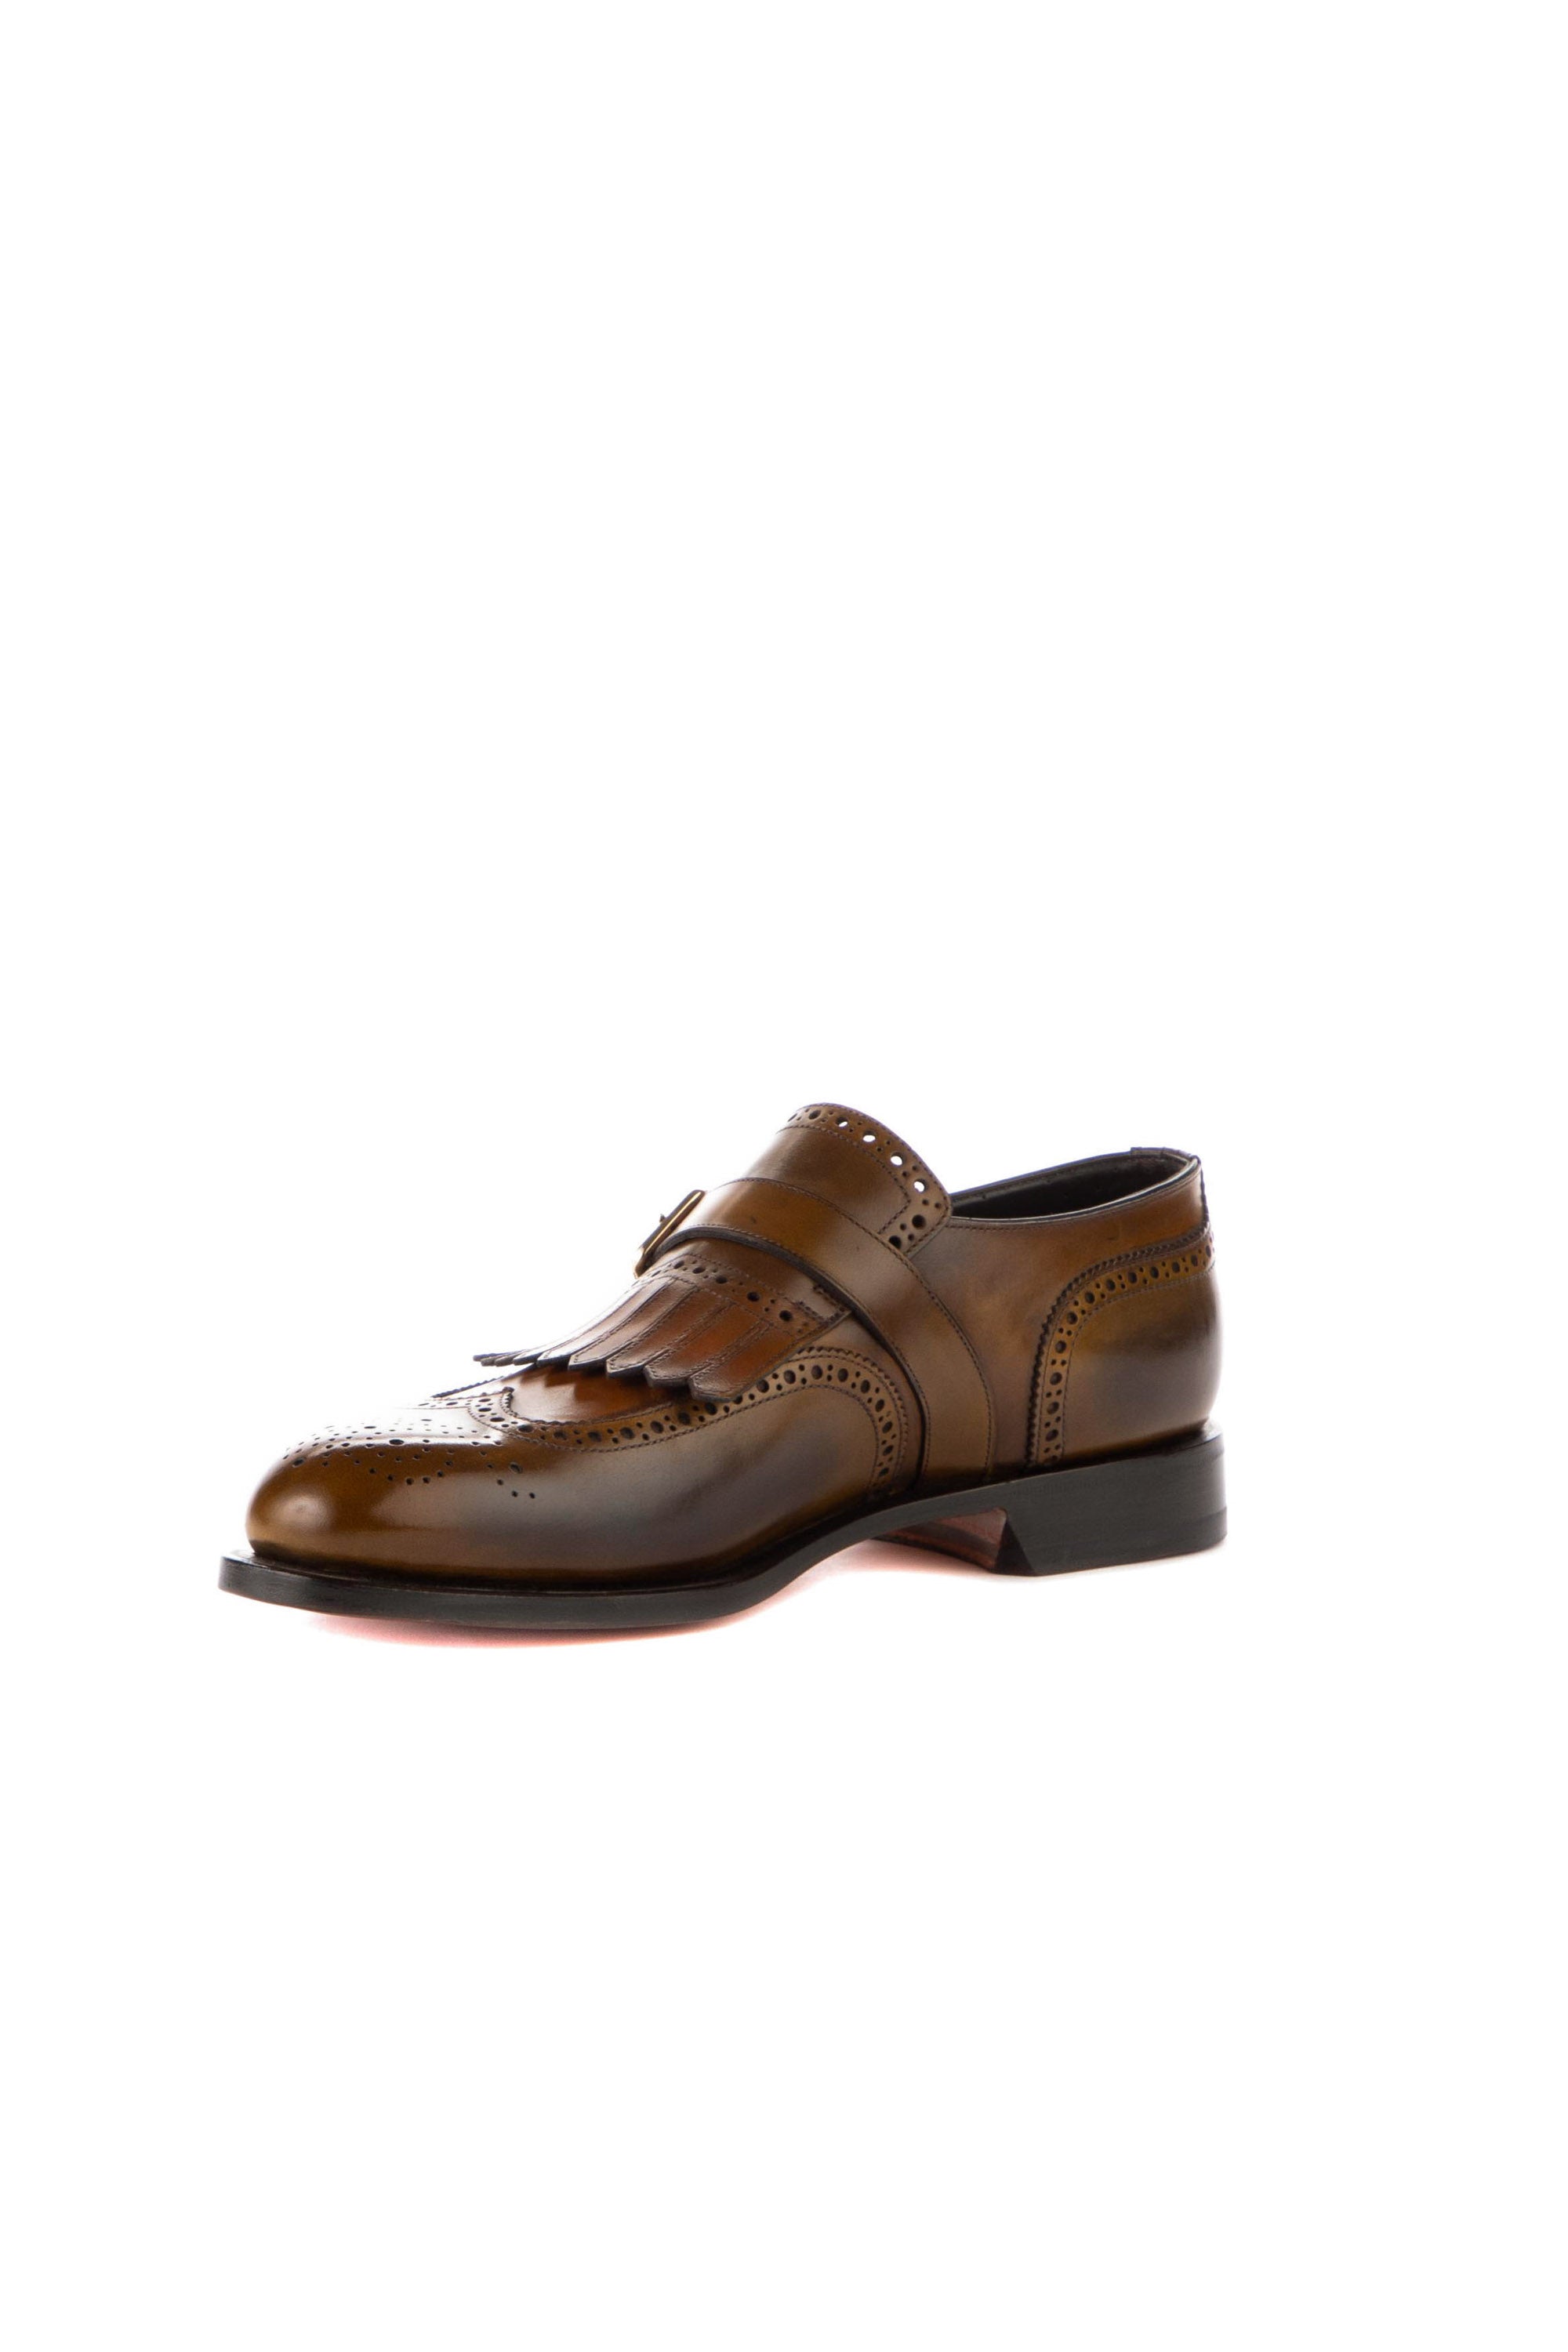 Single buckle leather shoe with fringes